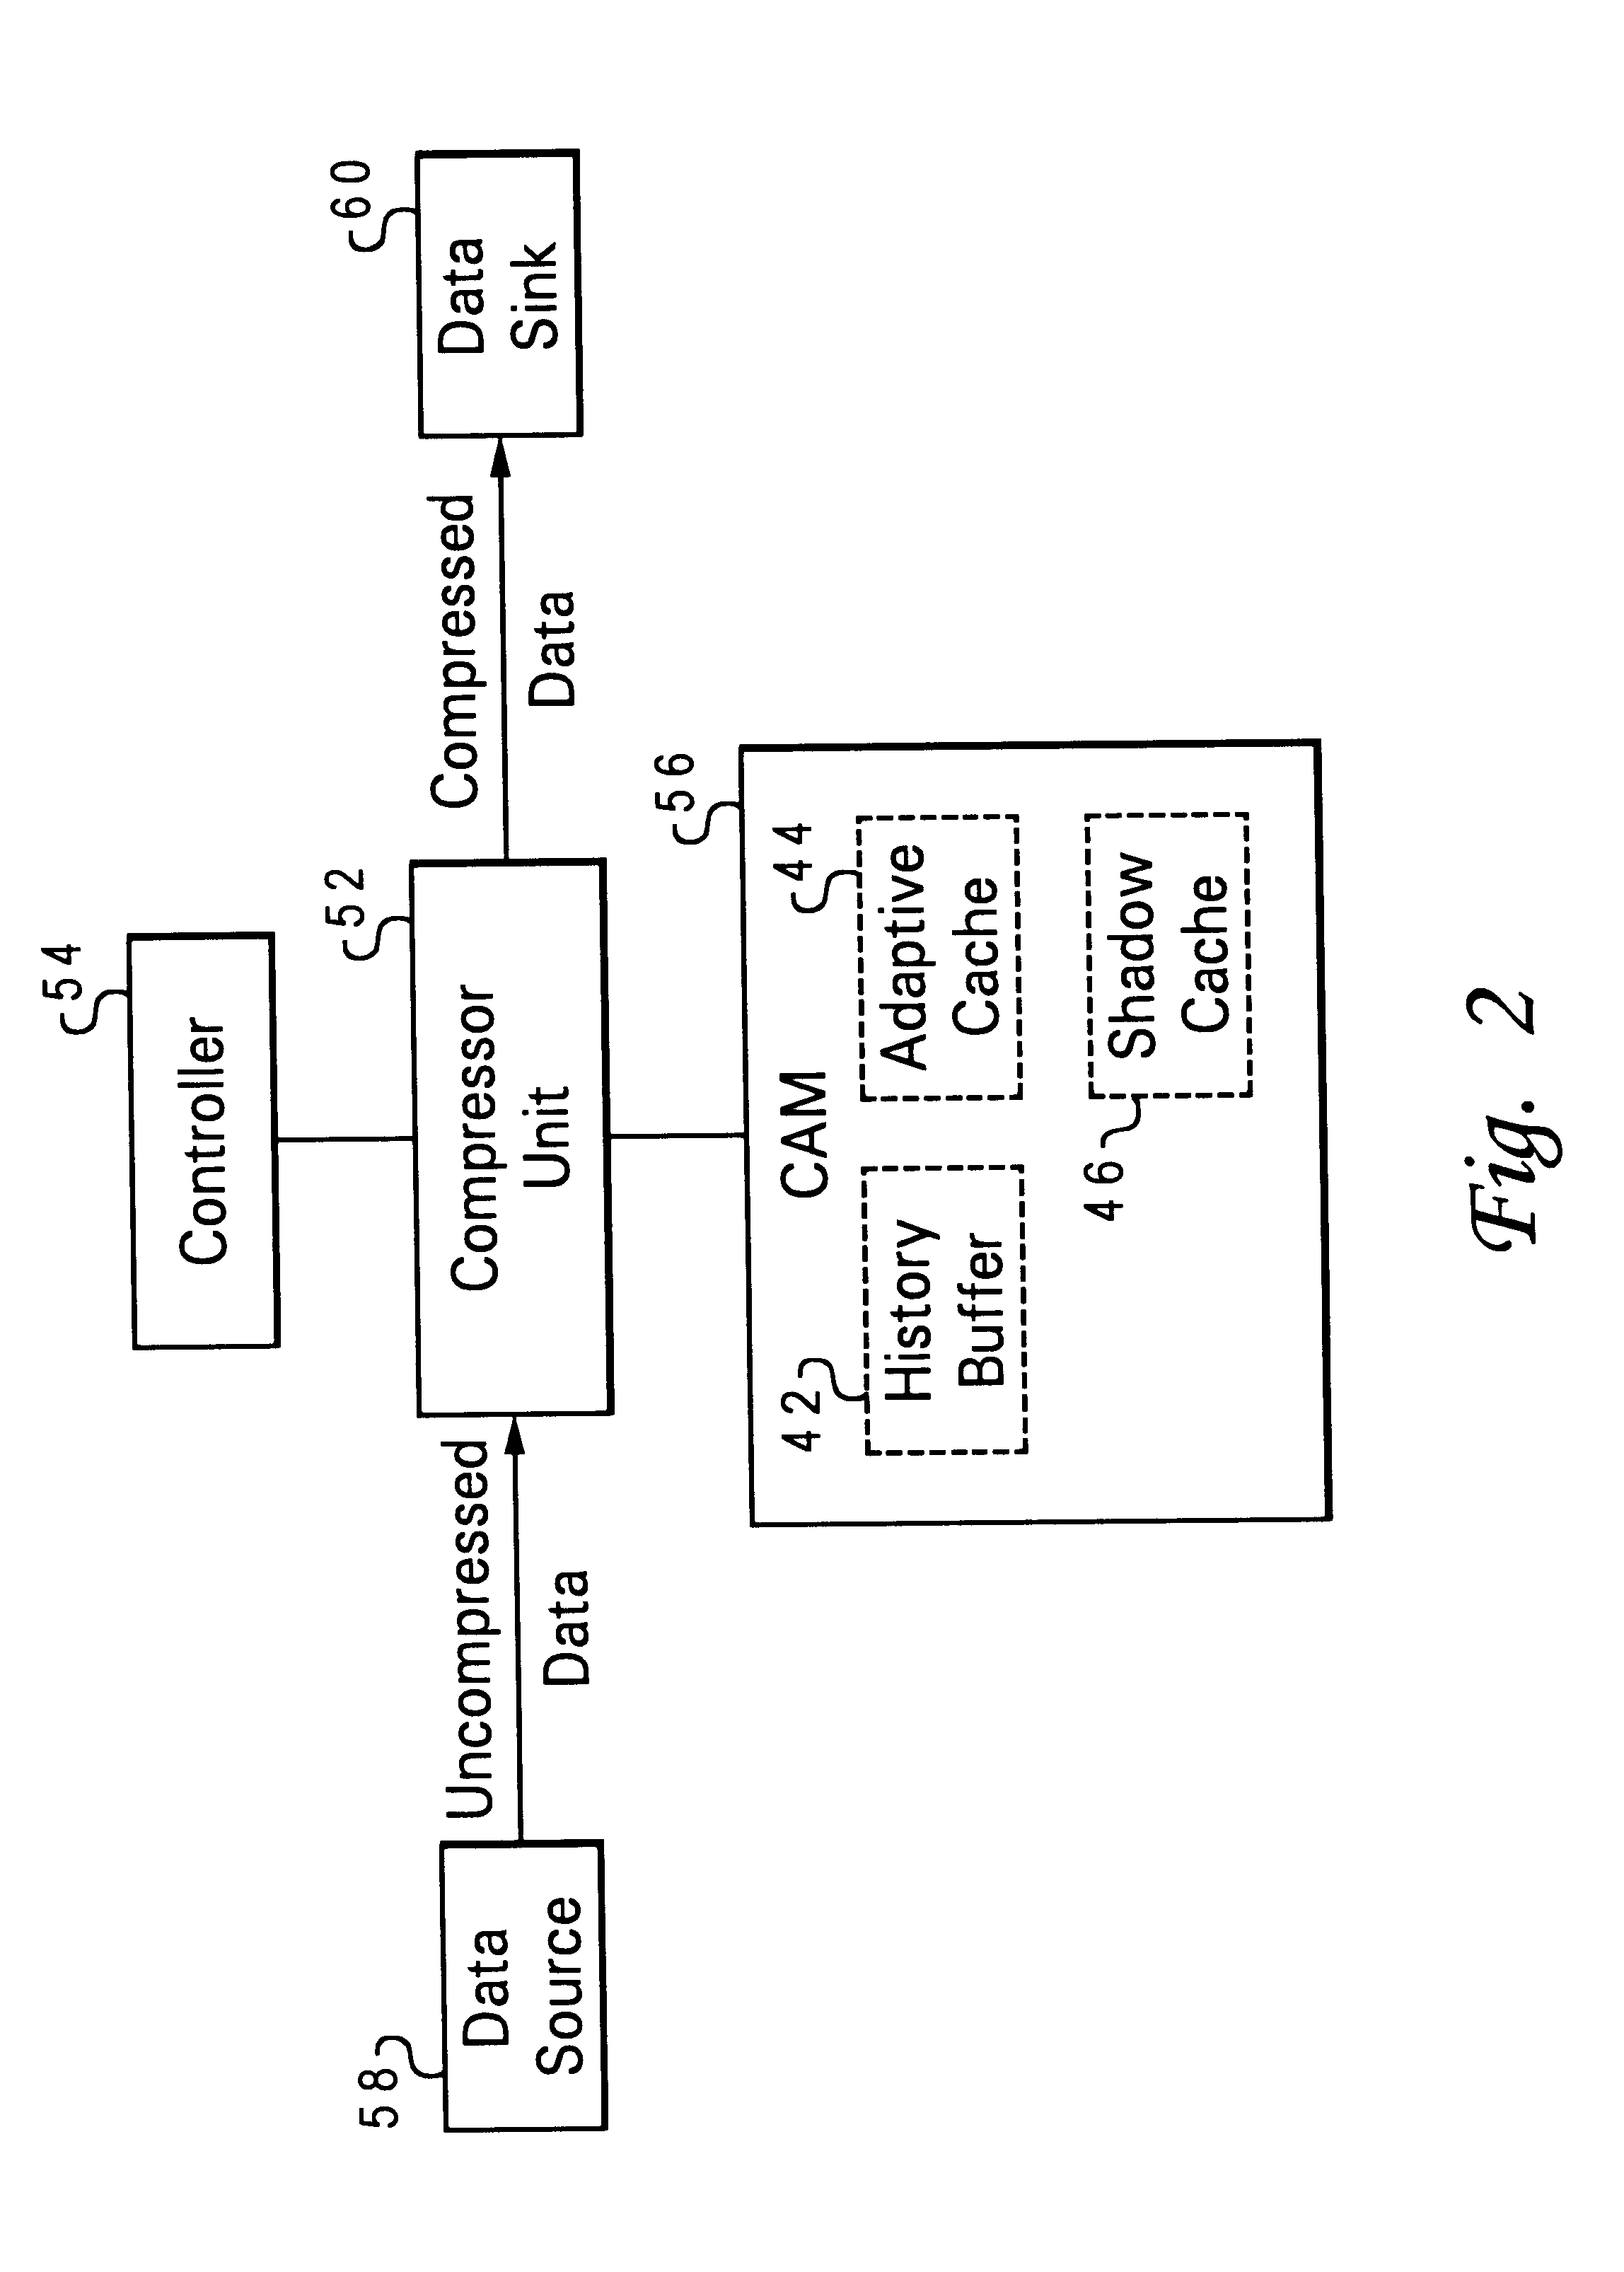 Method and system for improving lossless compression efficiency